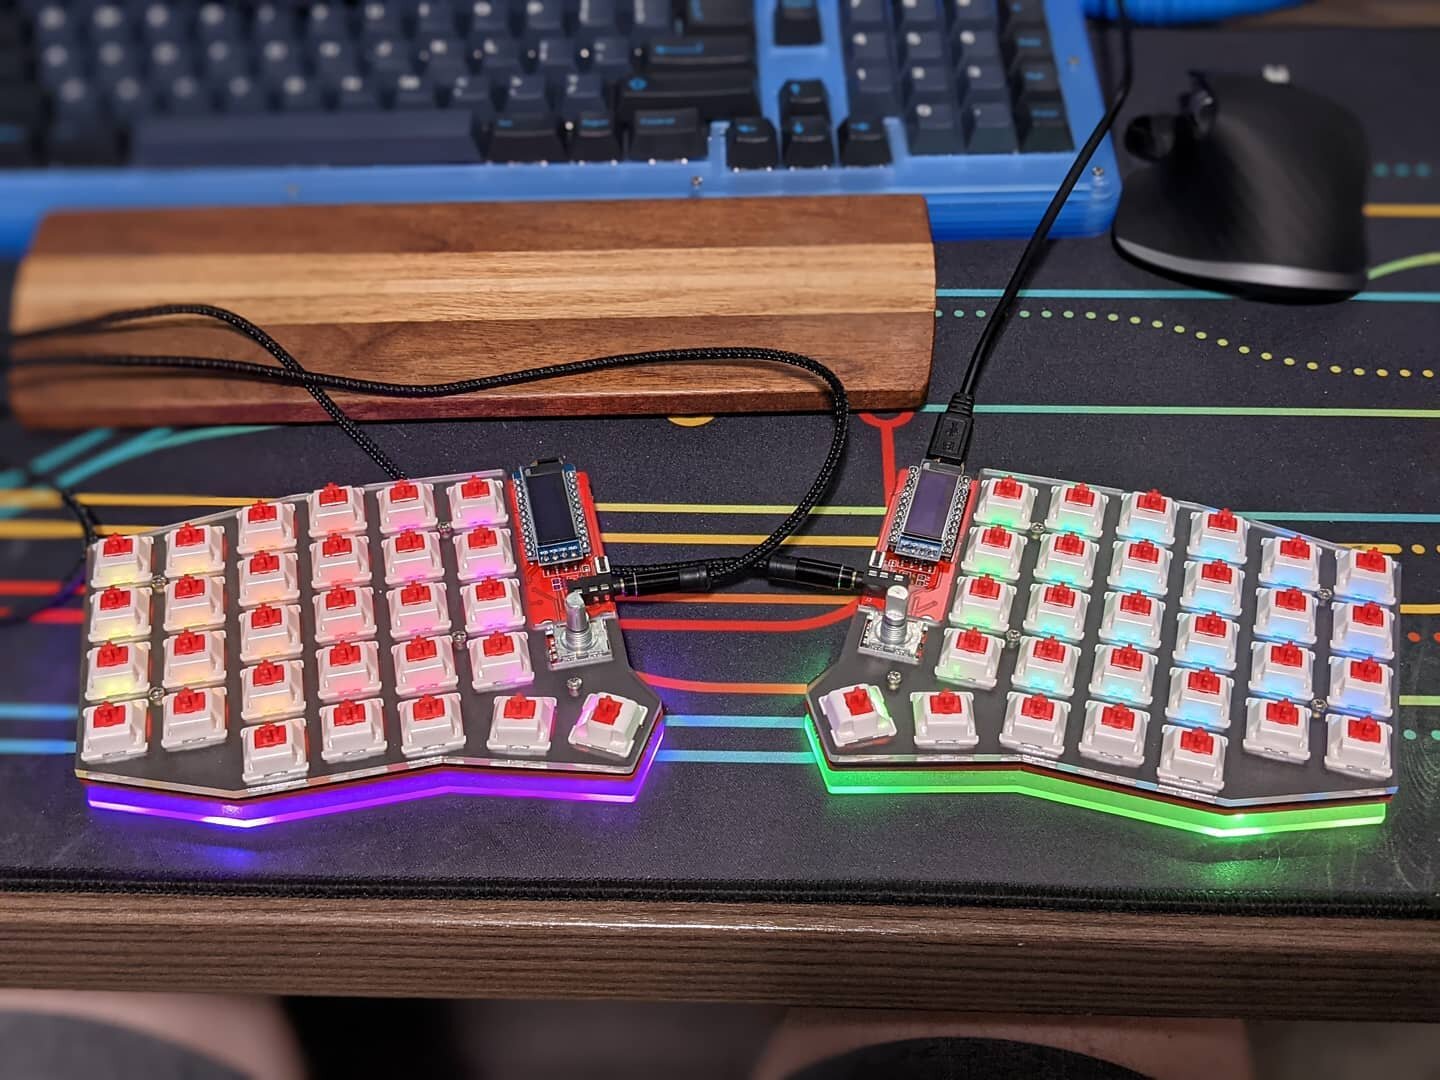 WIP RGB Sofle! It has per key and underglow RGB, kailh hotswap, OLEDs, and encoders on both sides

I'm almost done figuring out the last of the firmware changes and then it'll be all done! I'm hoping to have this for pre-sale this week in black and r